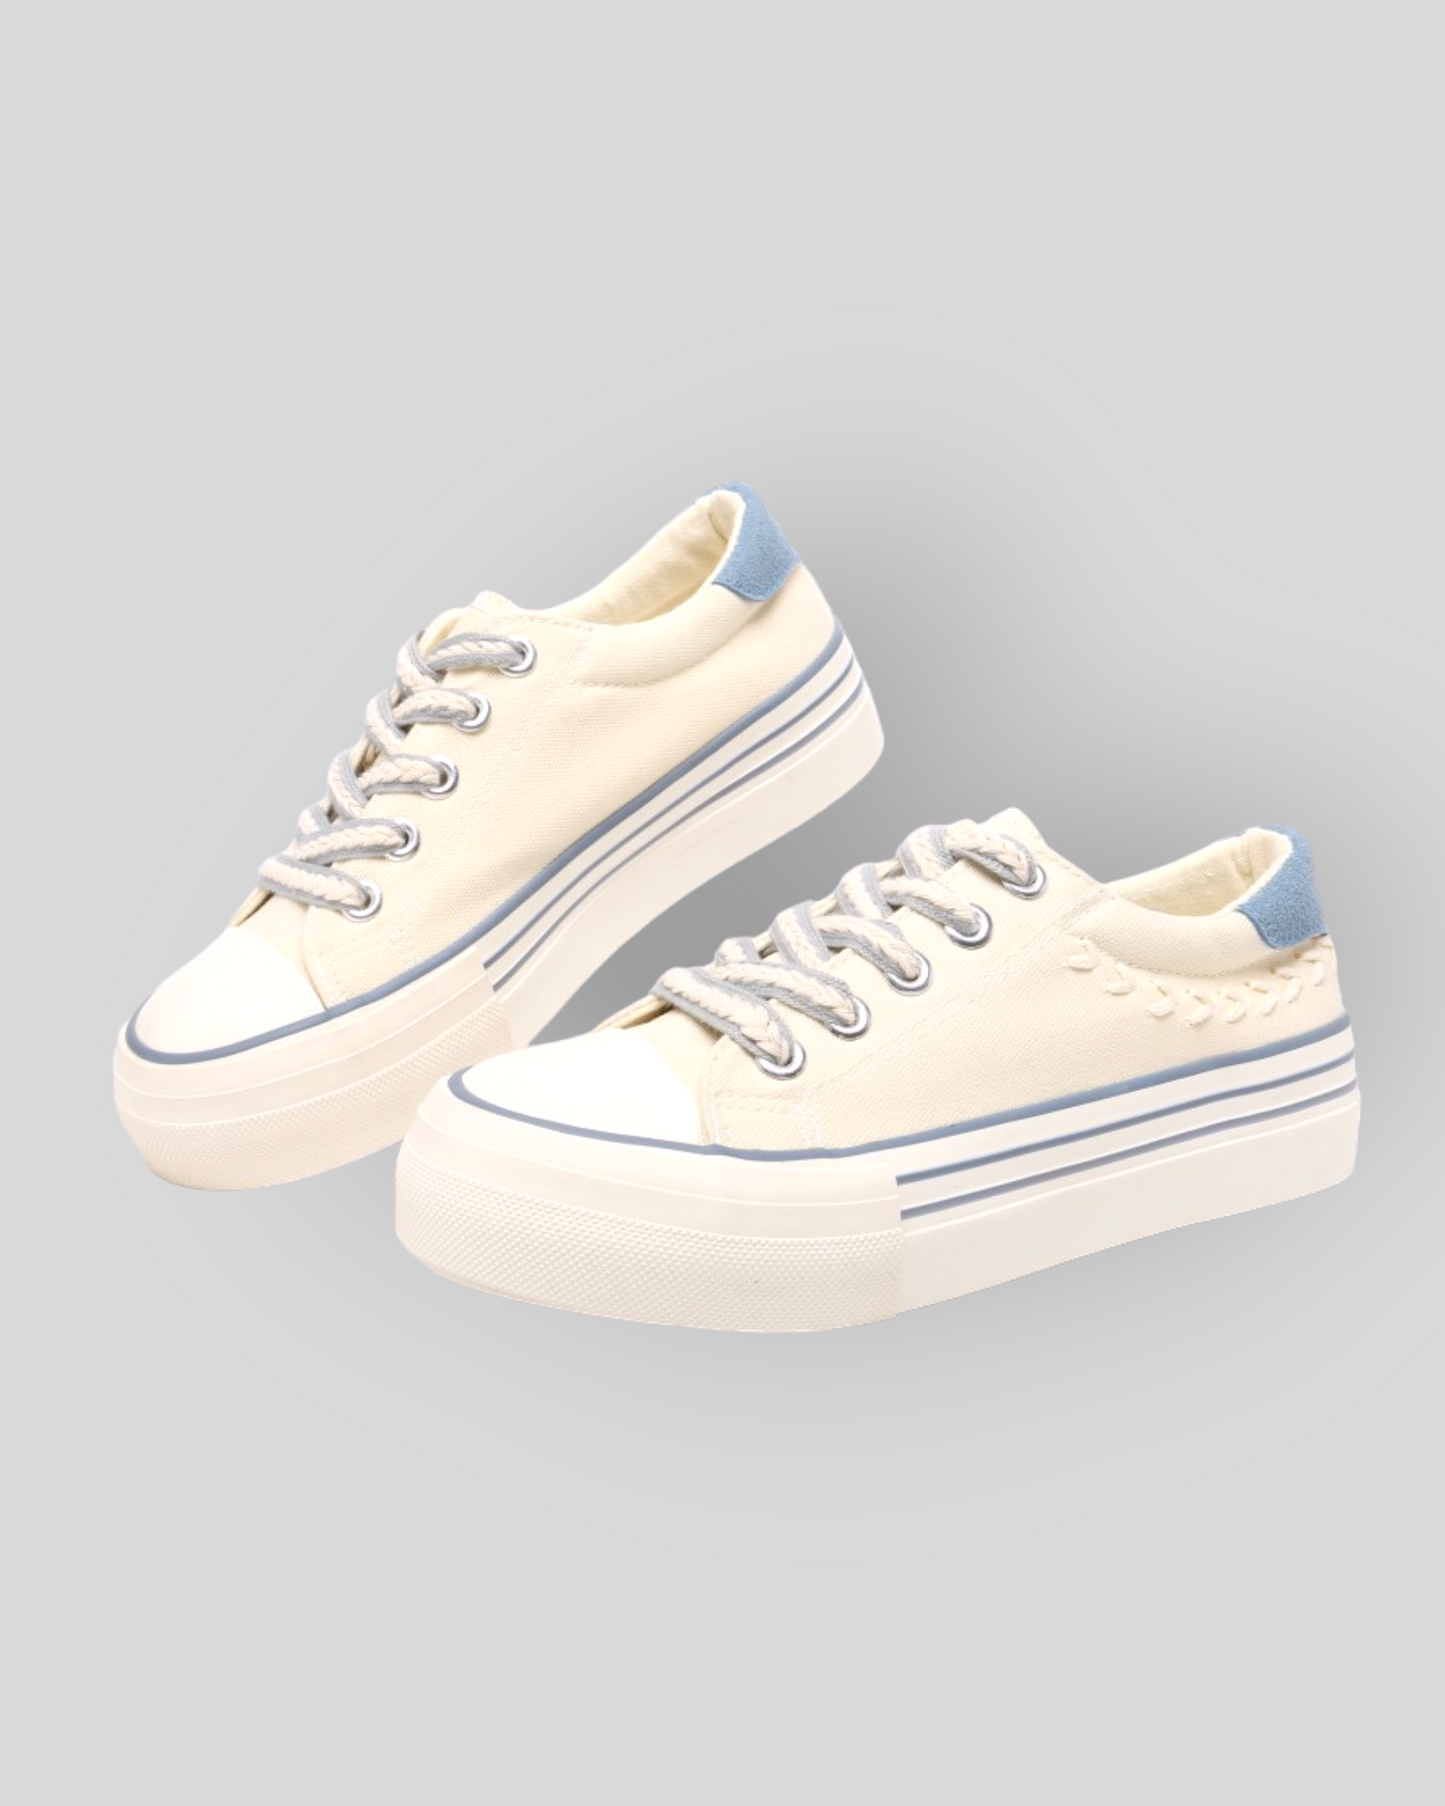 Women's Outdoor Blue Canvas Sneakers/ Trainers/ Shoes